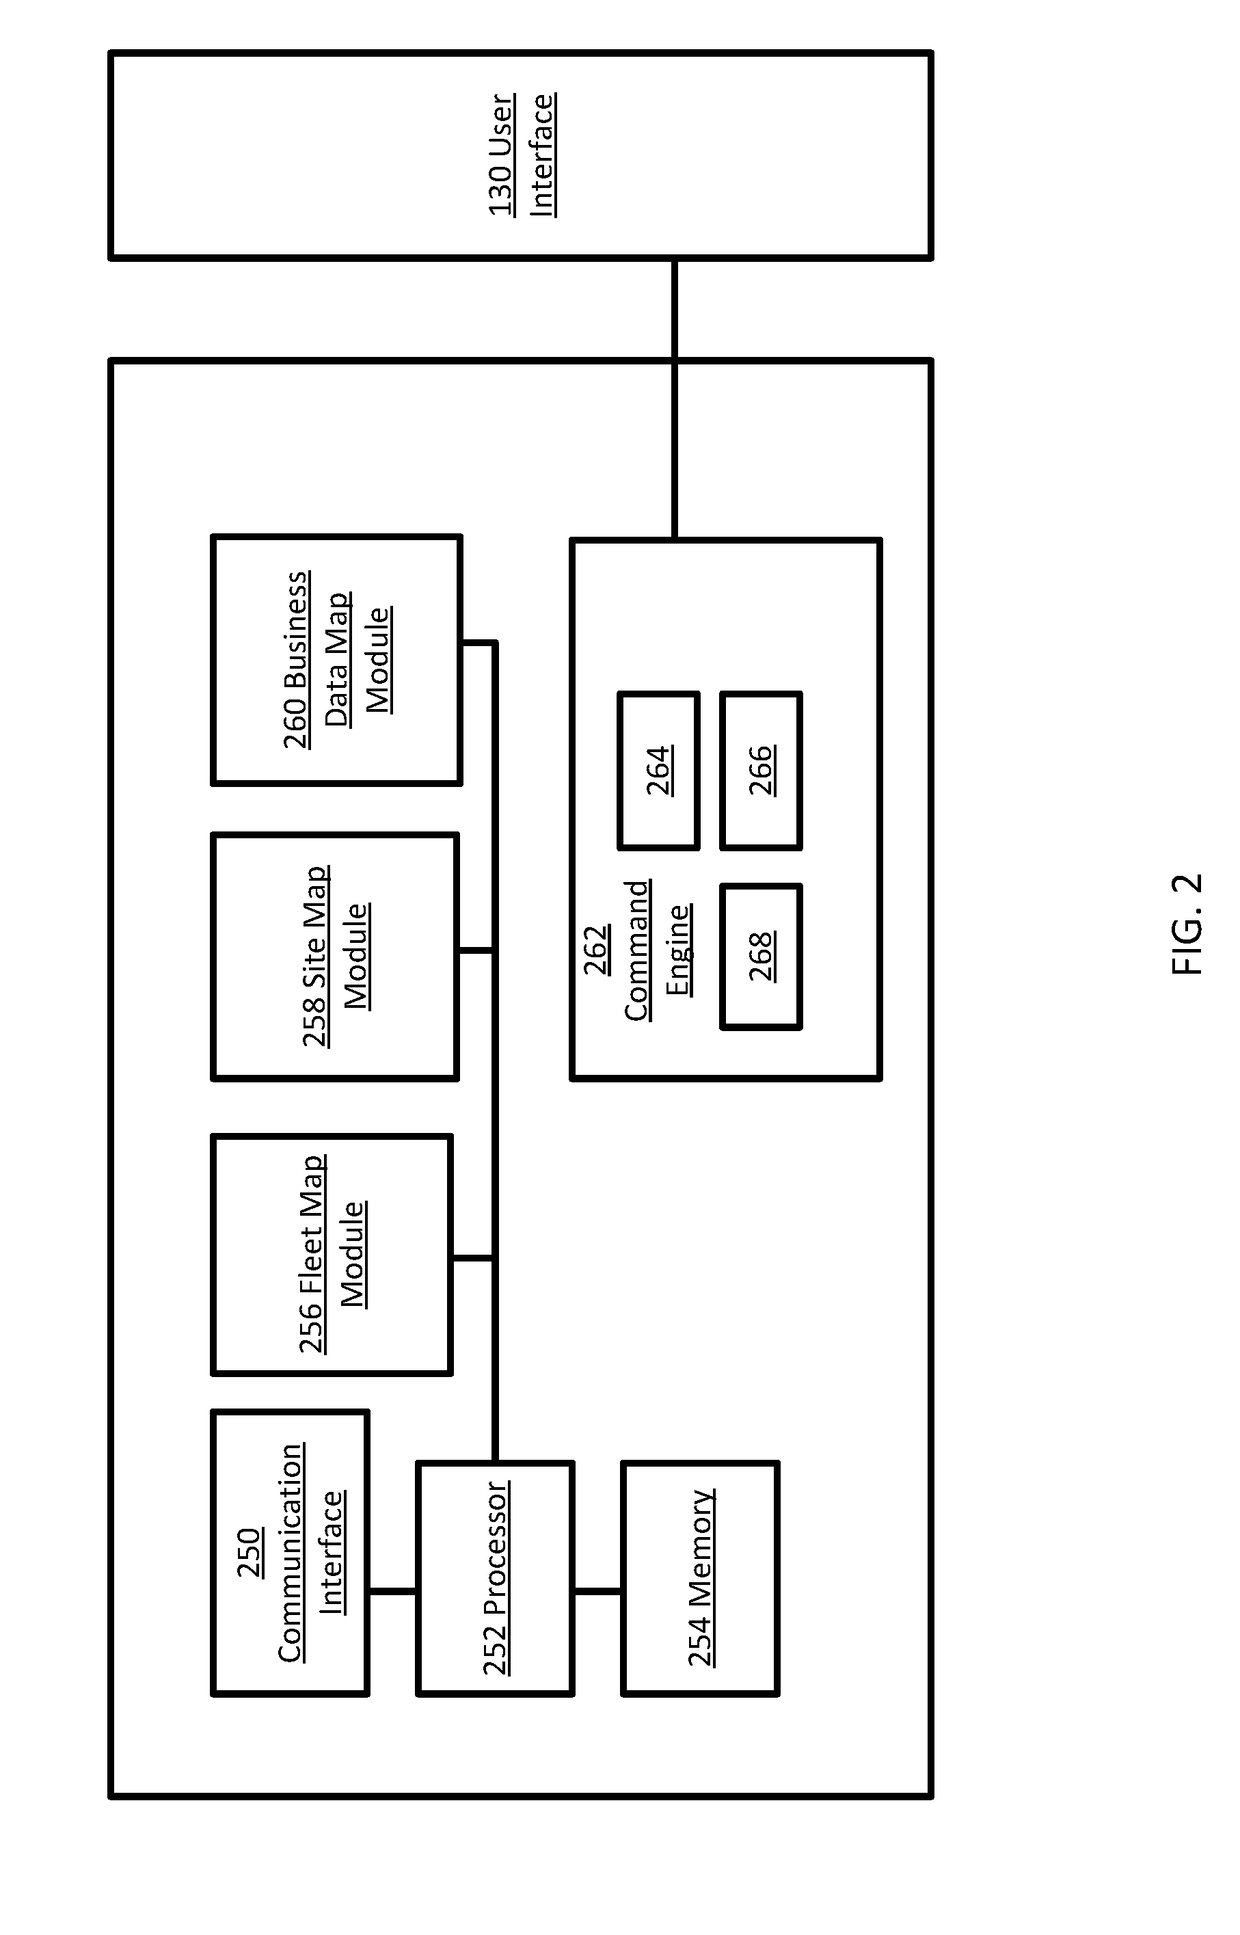 Query with data distribution in a hospital network